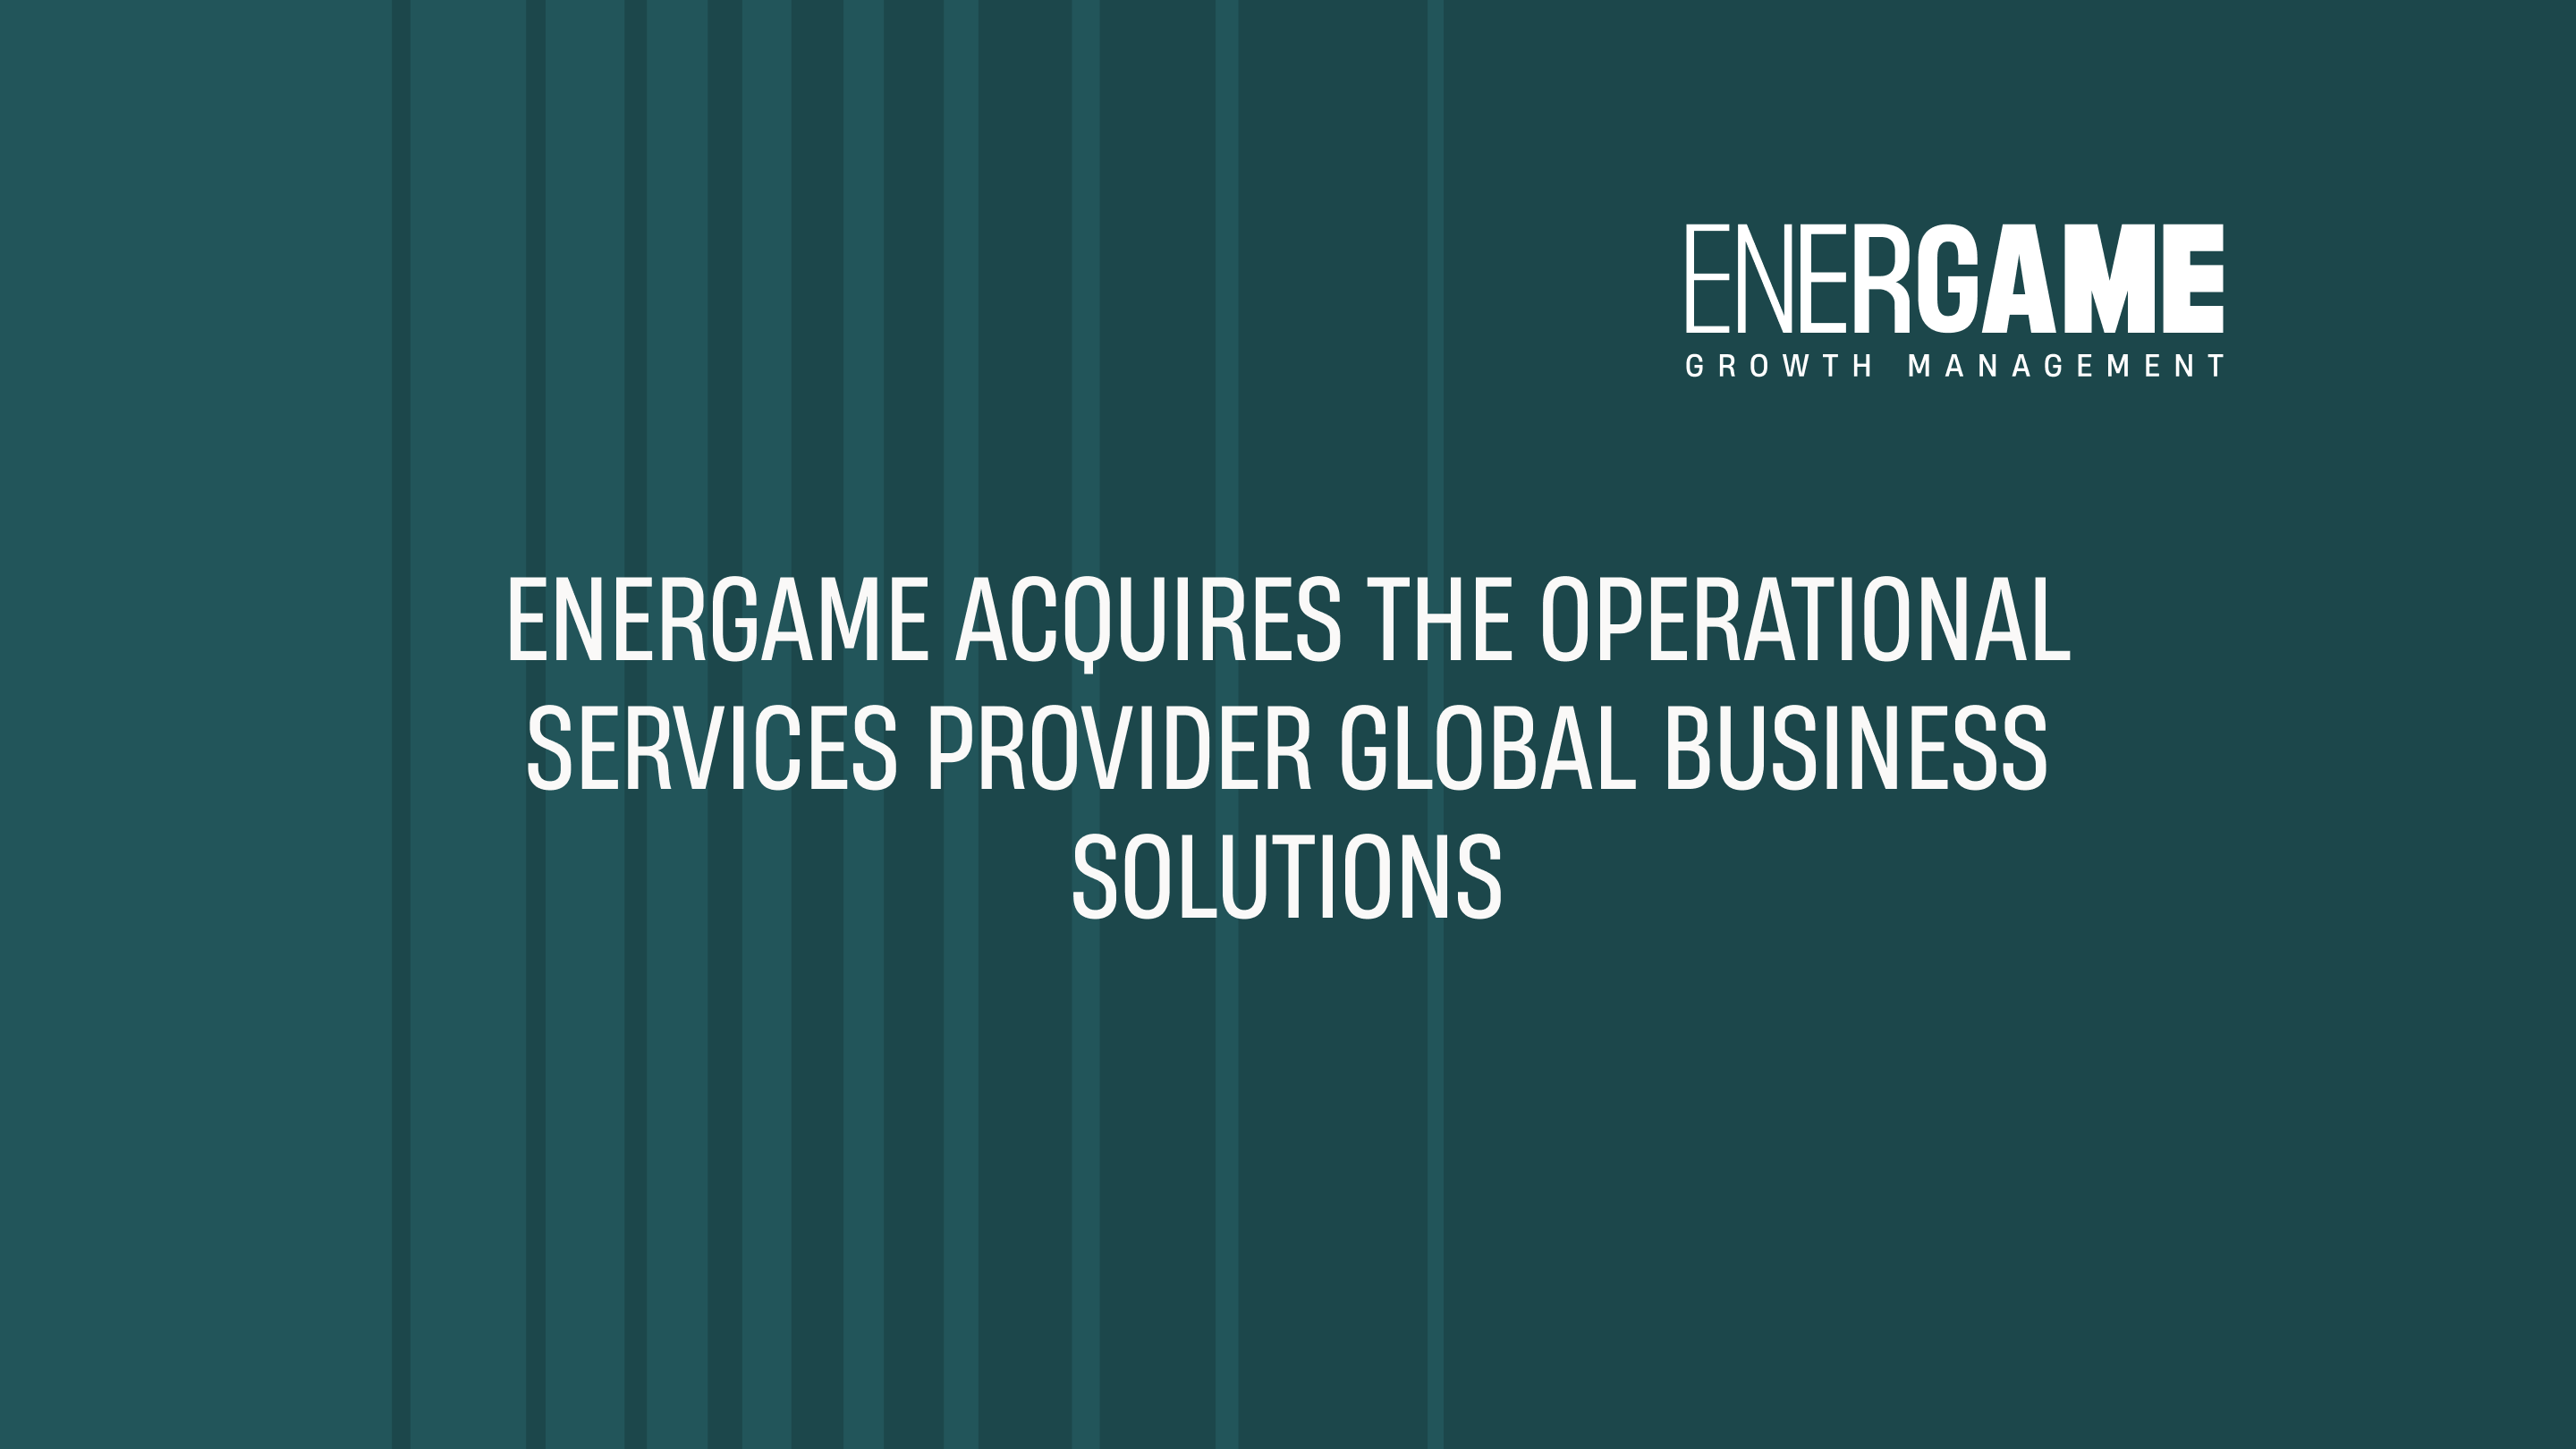 Energame acquires the operational services provider Global Business Solutions